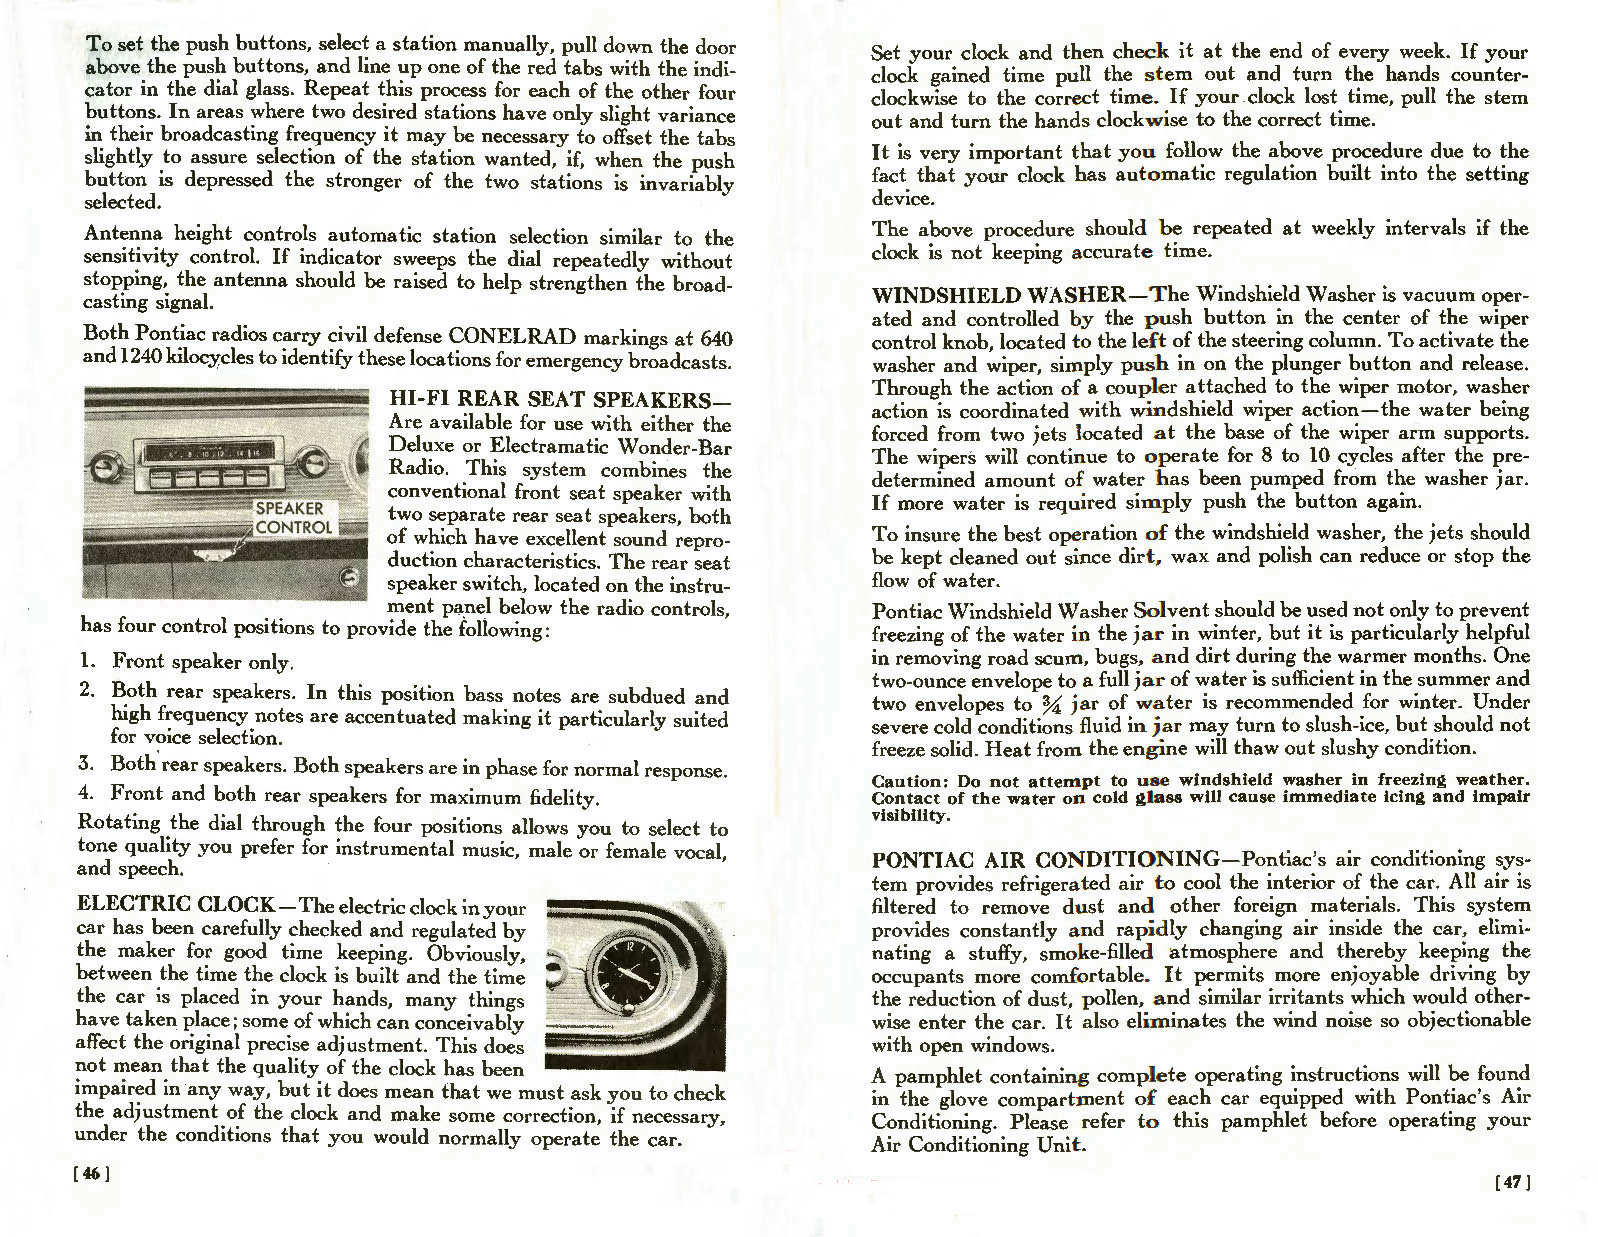 1957_Pontiac_Owners_Guide-46-47